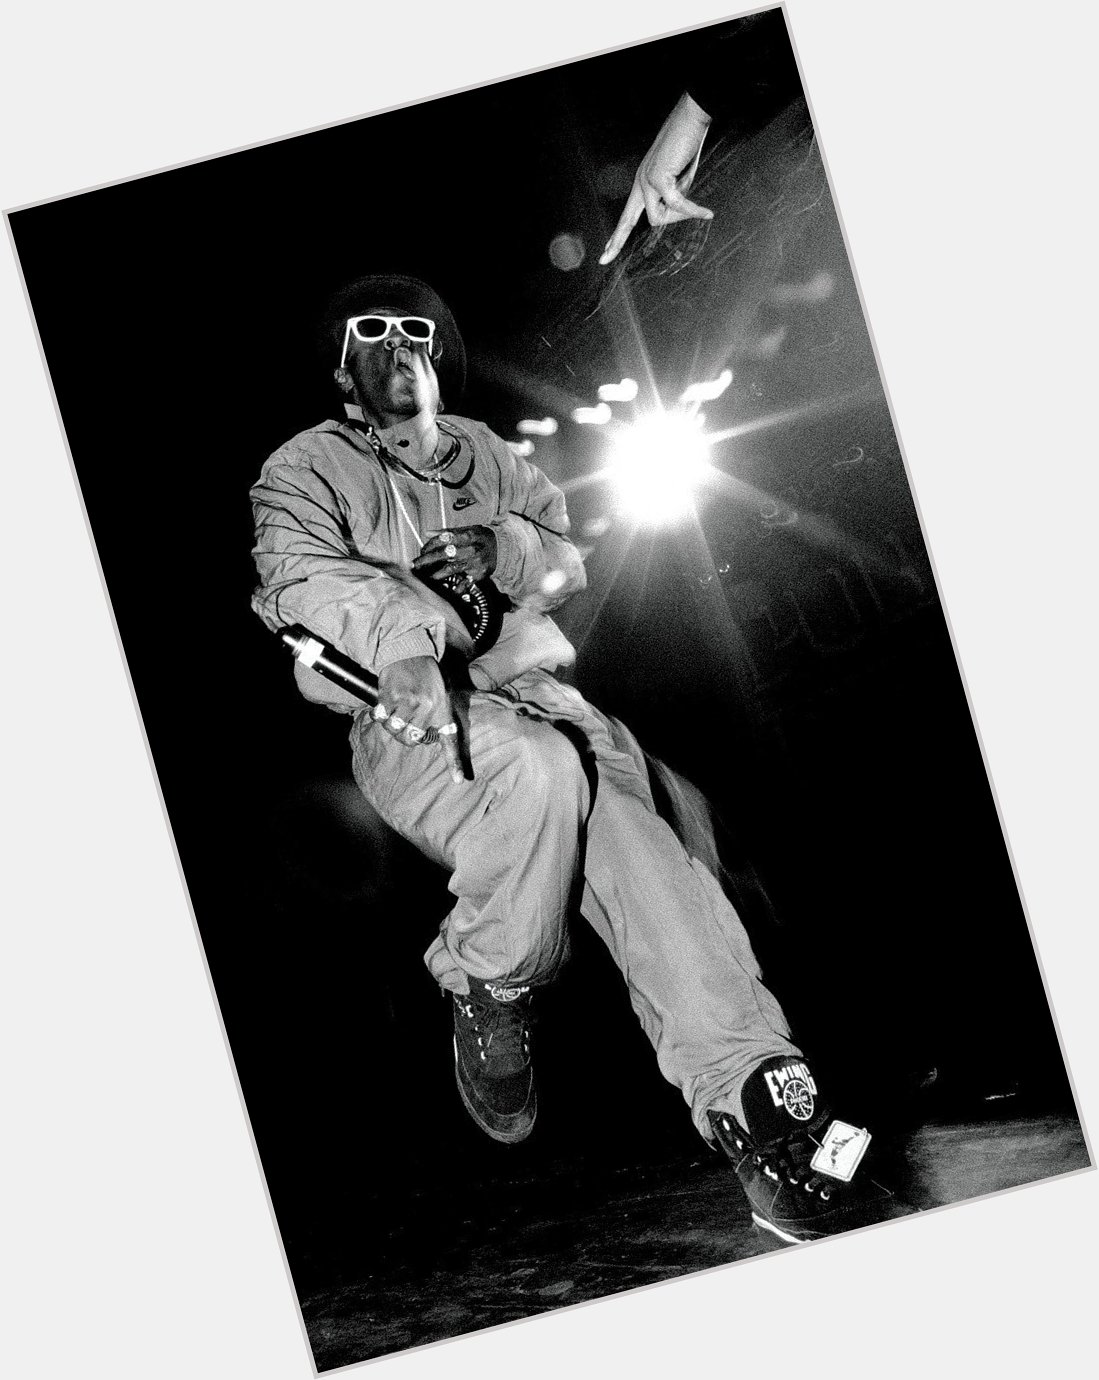 Dope pic of Flavor Flav was born March 16, 1959 Happy Birthday 